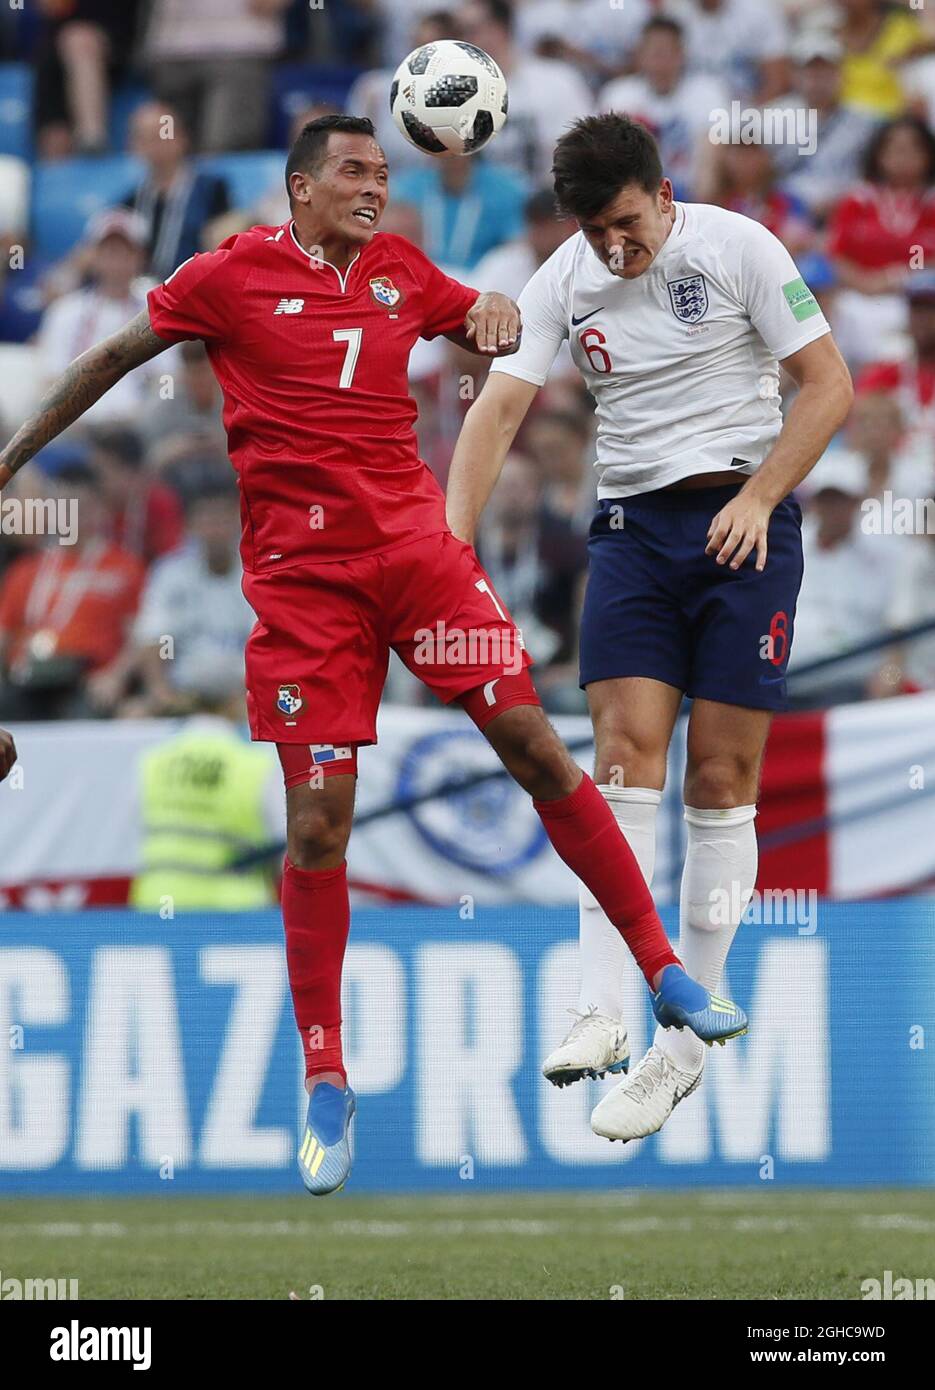 Blas Perez of Panama and Harry Maguire of England during the FIFA World Cup 2018 Group G match at the Nizhny Novgorod Stadium, Nizhny Novgorod. Picture date 24th June 2018. Picture credit should read: David Klein/Sportimage via PA Images Stock Photo